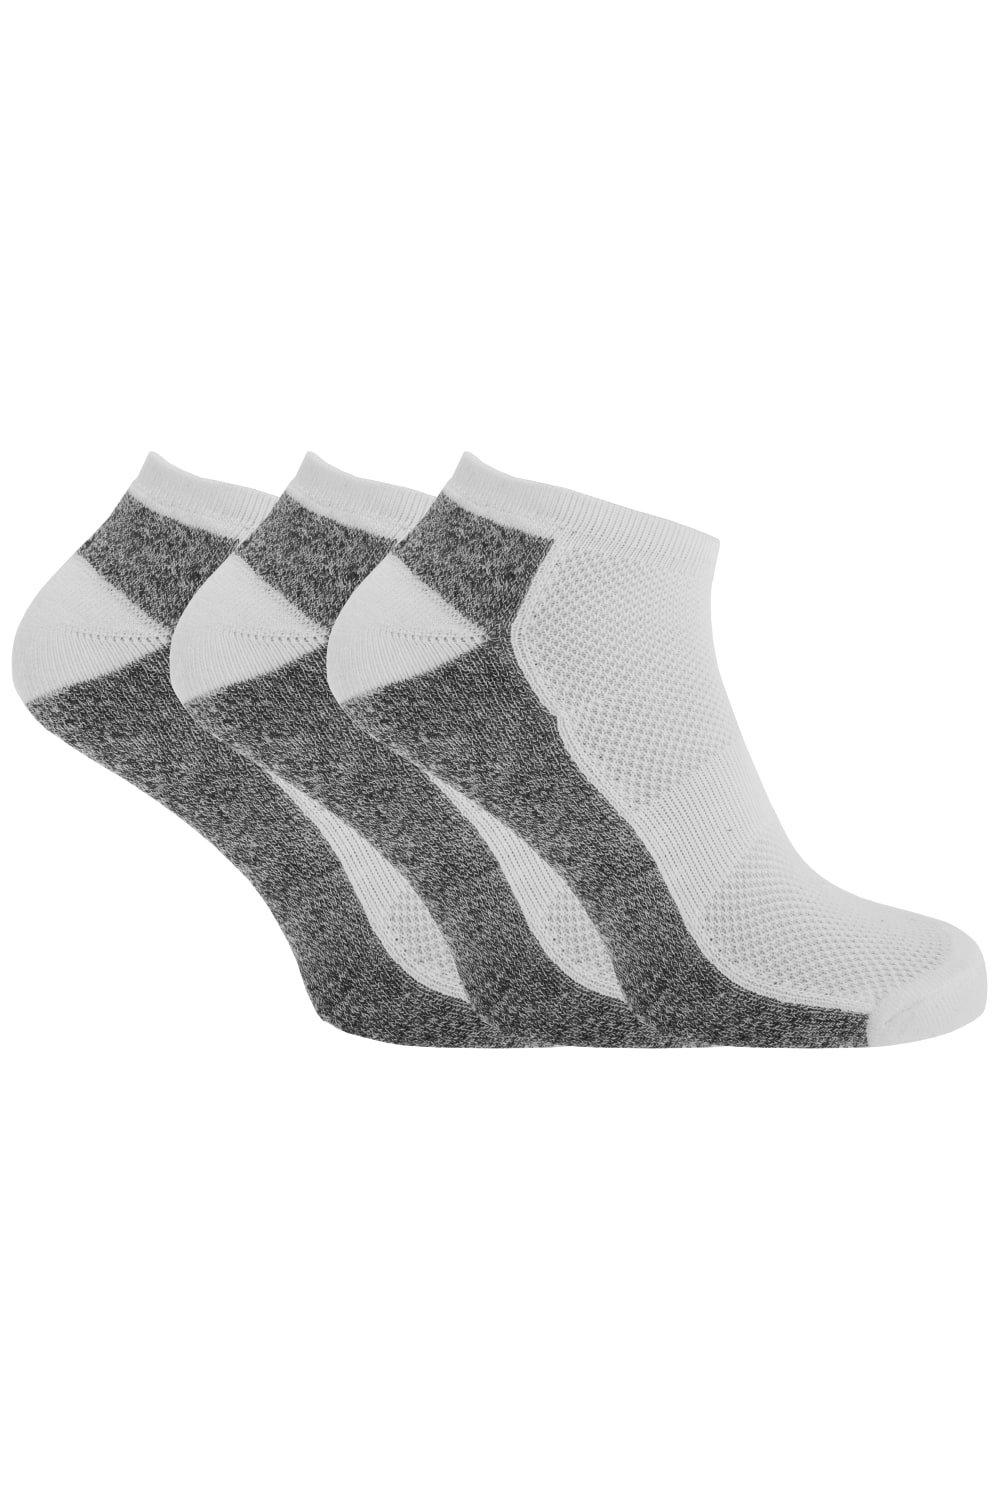 Cotton Rich Sports Trainer Socks With Mesh And Ribbing (Pack Of 3)